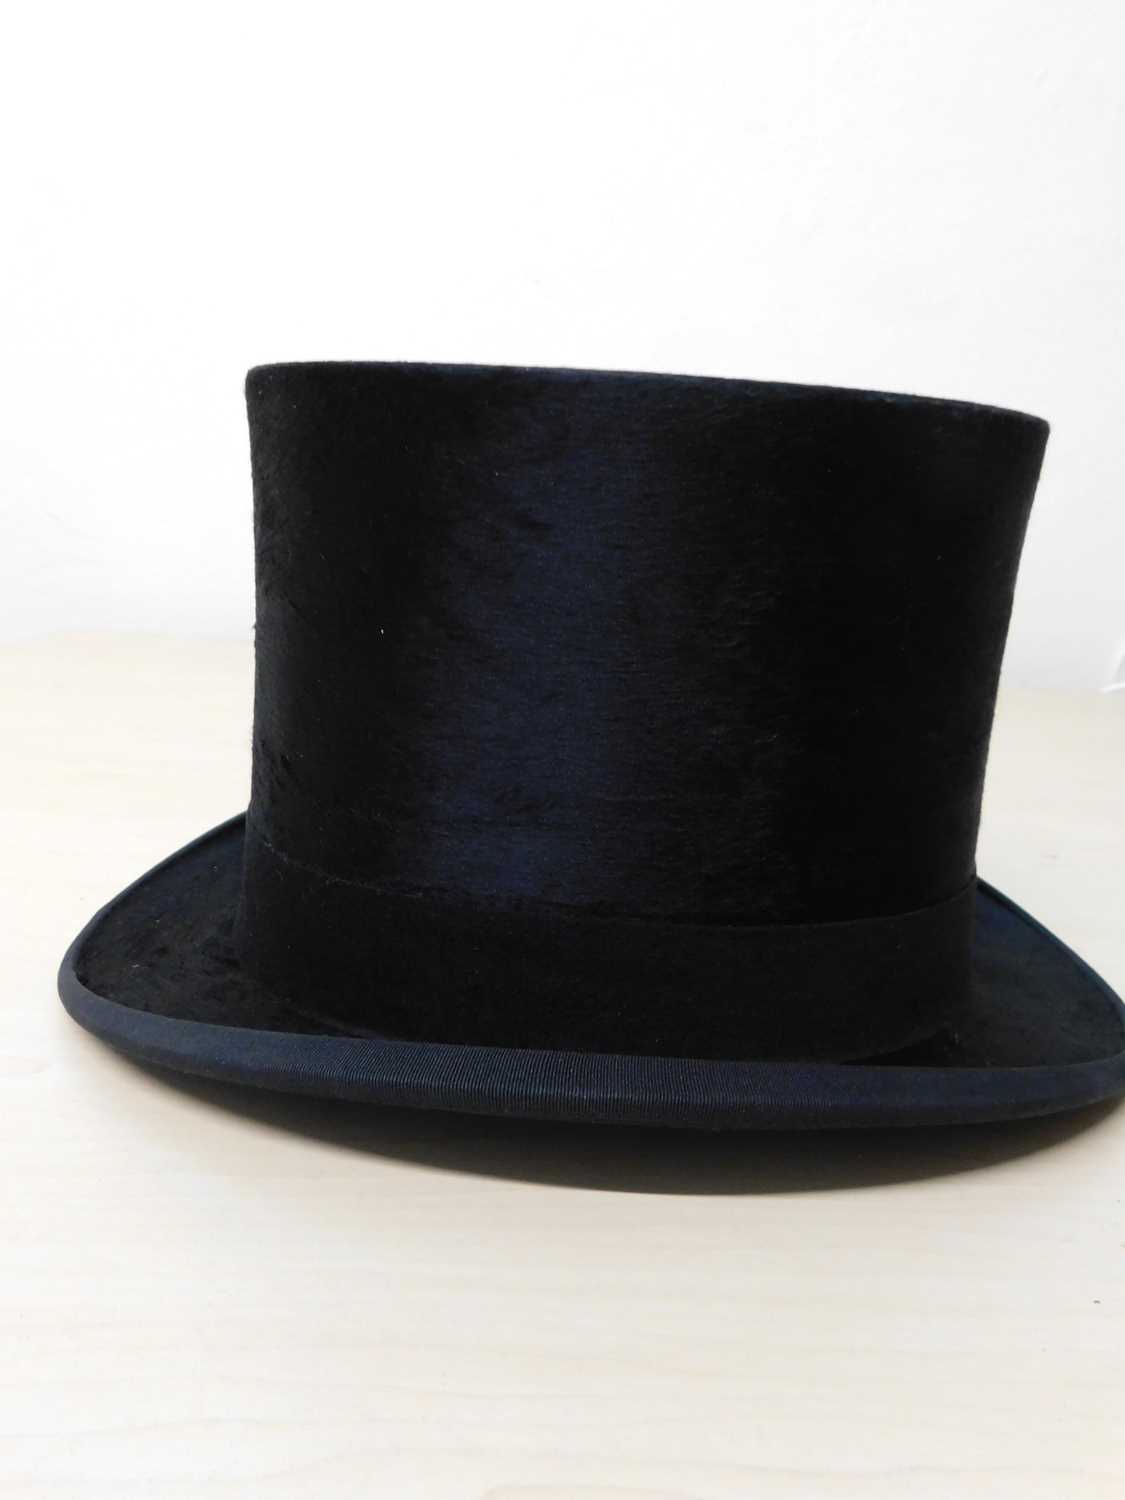 A black silk top hat by Hope Brosthers Ltd., Ludgate Hill, London, inner diameter approx. 55cm, with - Image 7 of 9